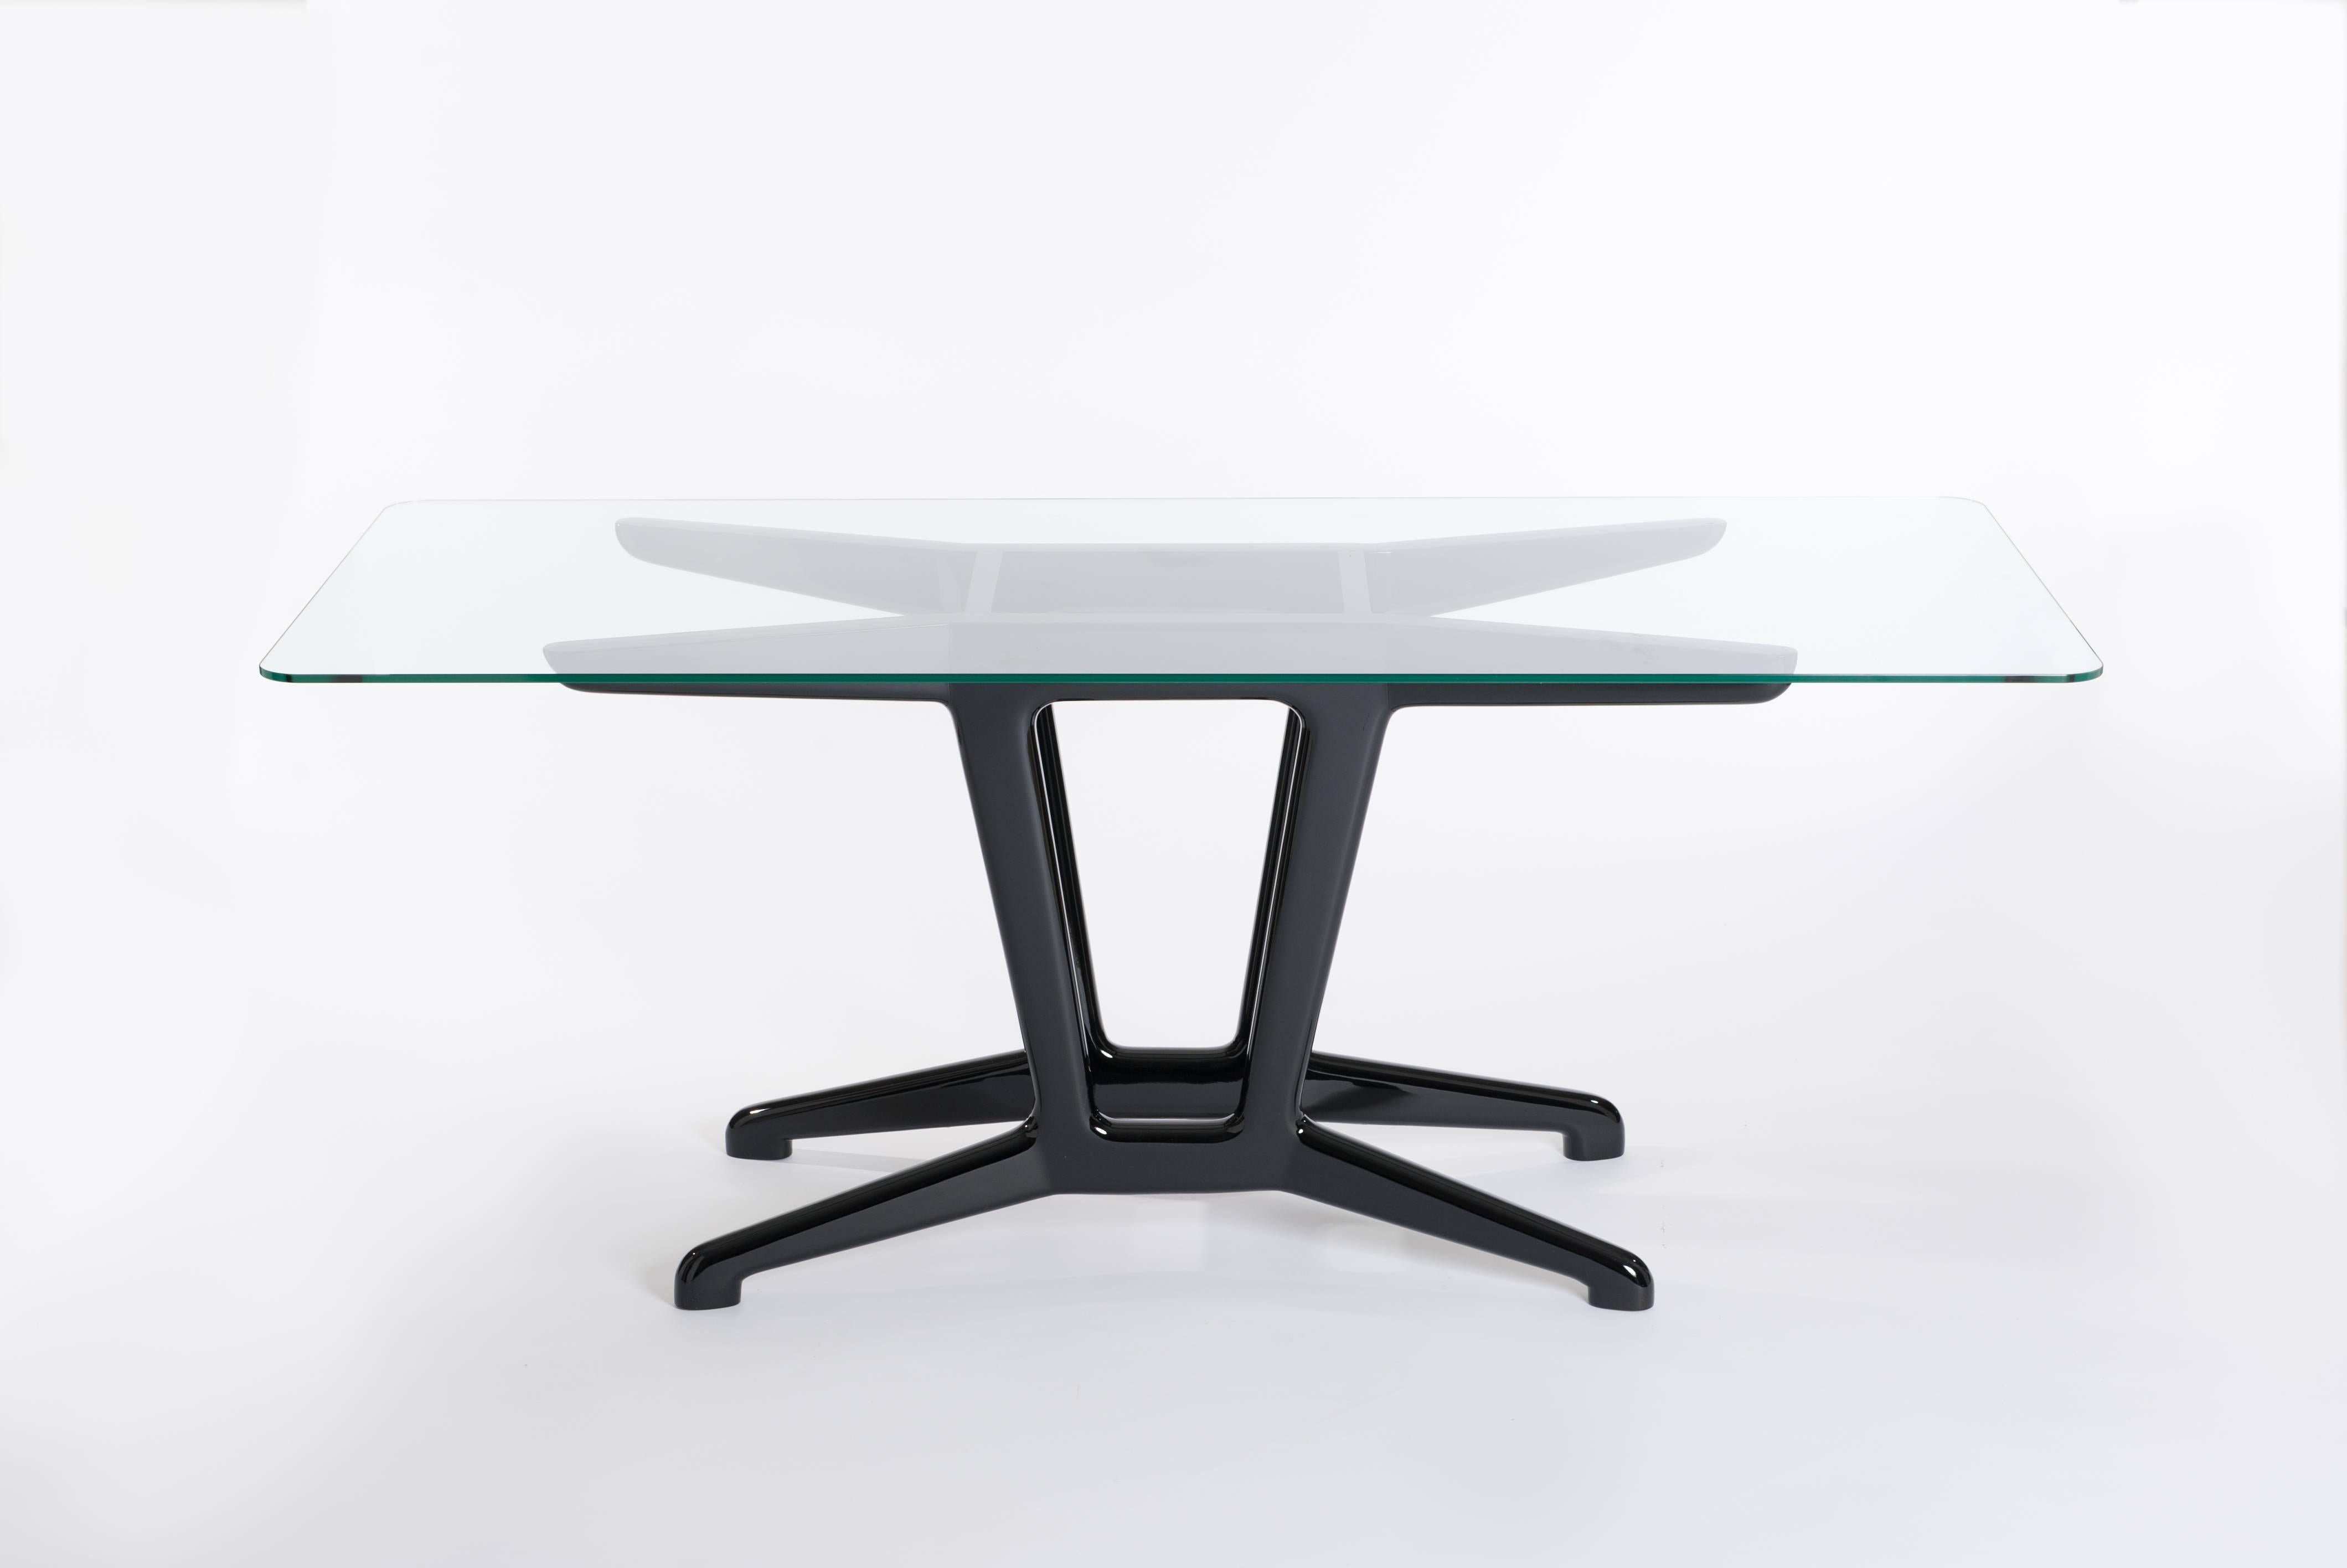 Midcentury Italian, elegant dining table or desk with re-lacquered wooden base black colored - glass top (1cm thickness) with rounded edges.
The fleet footed base construction and the non-edges glass top gives an organic impression.
On demand we